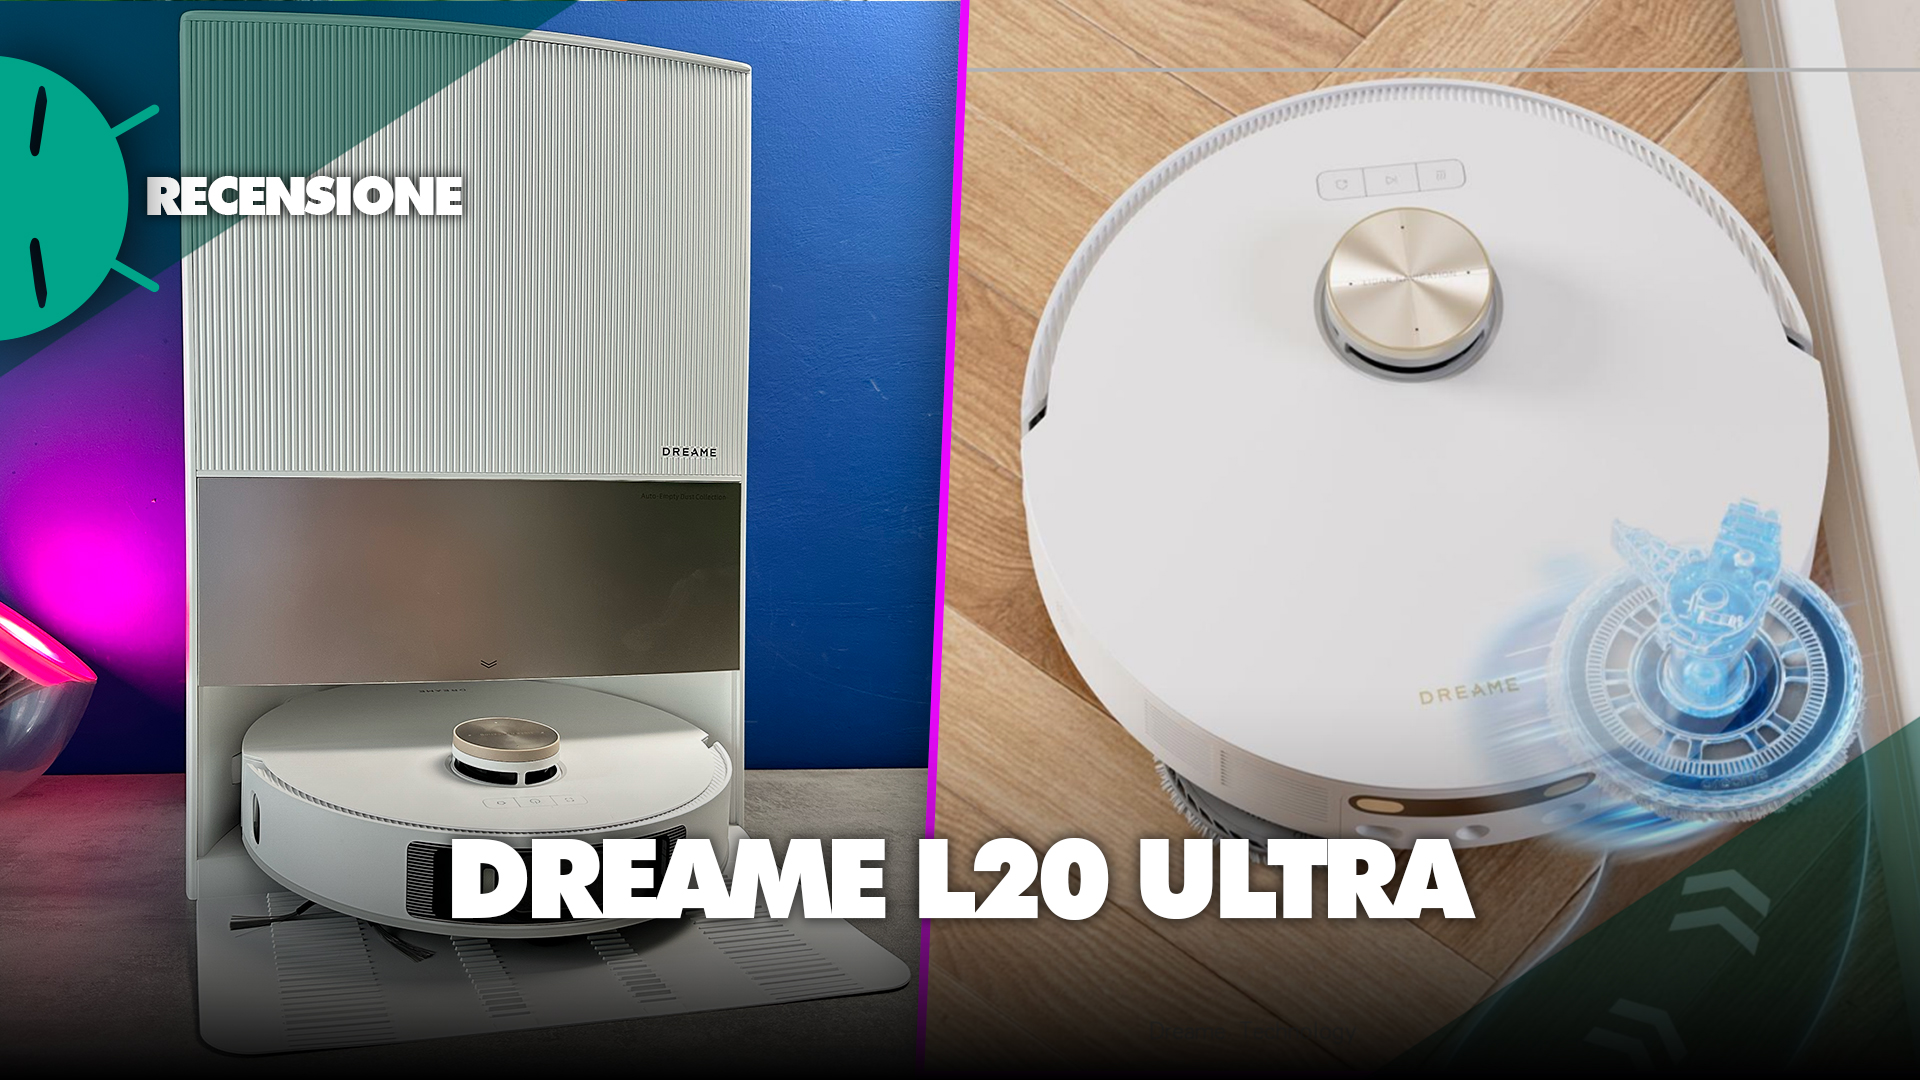 Dreame L20 Ultra Review - Why Did it Win This Year? 